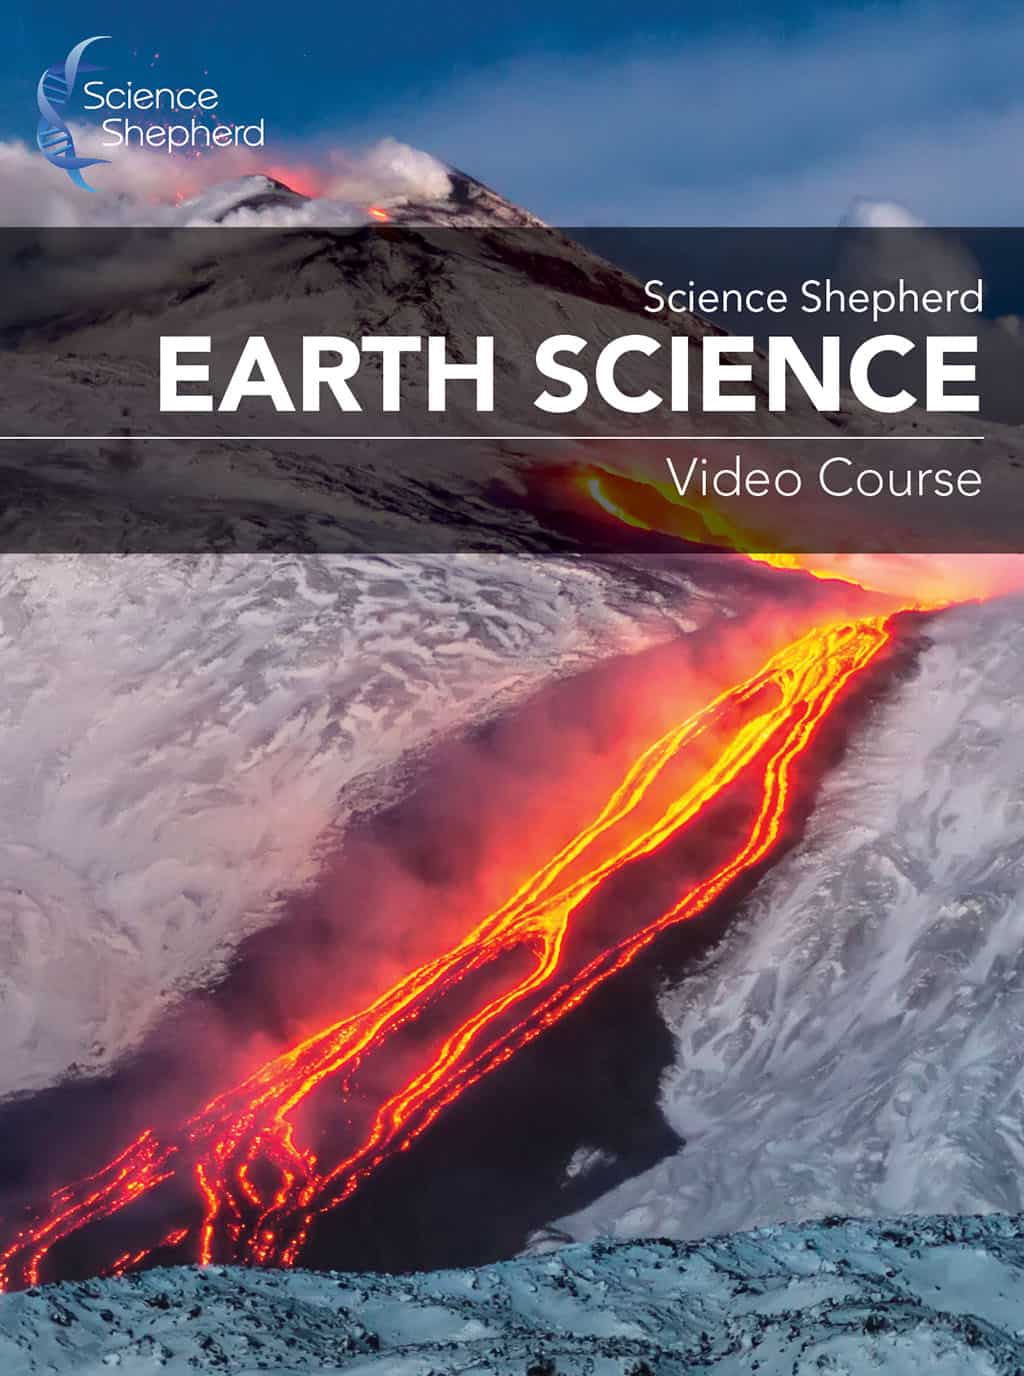 Christian Earth Science curriculum video course cover image of volcano erupting